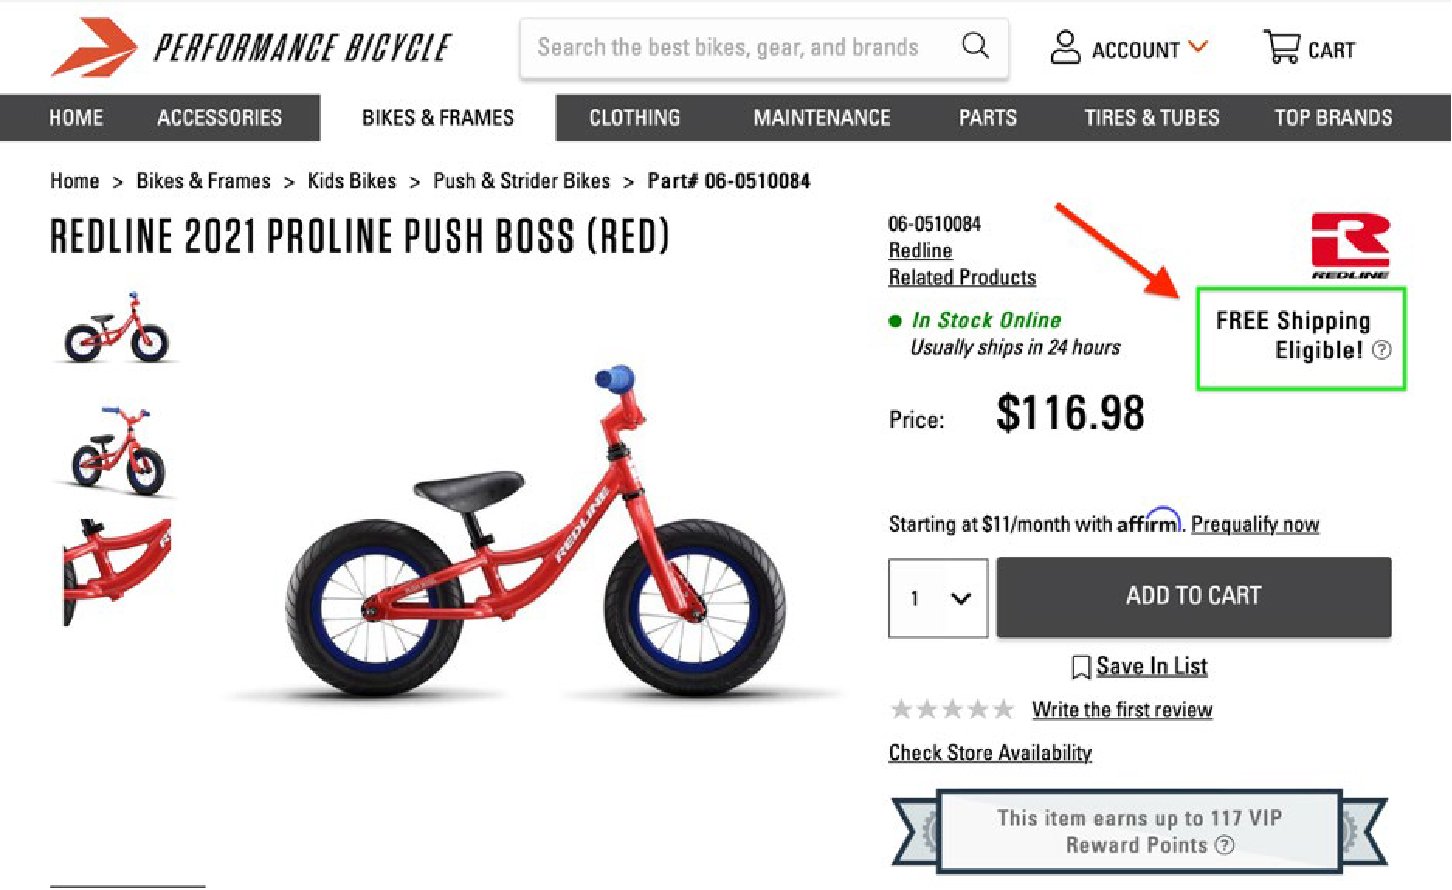 Free Shipping shown on a product